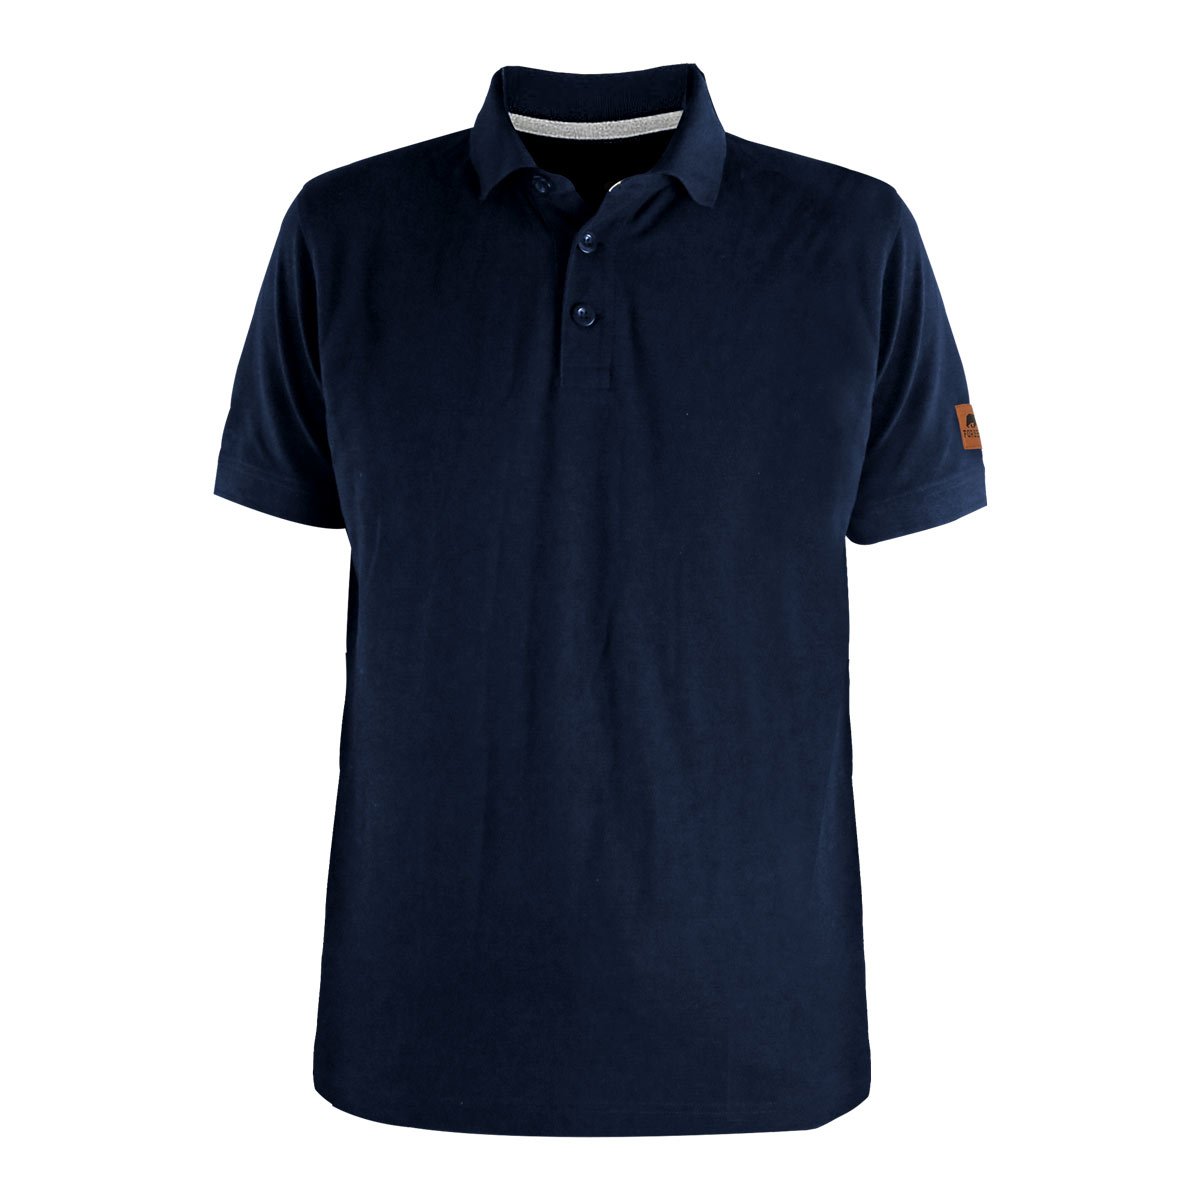 FORSBERG Polo shirt with button placket